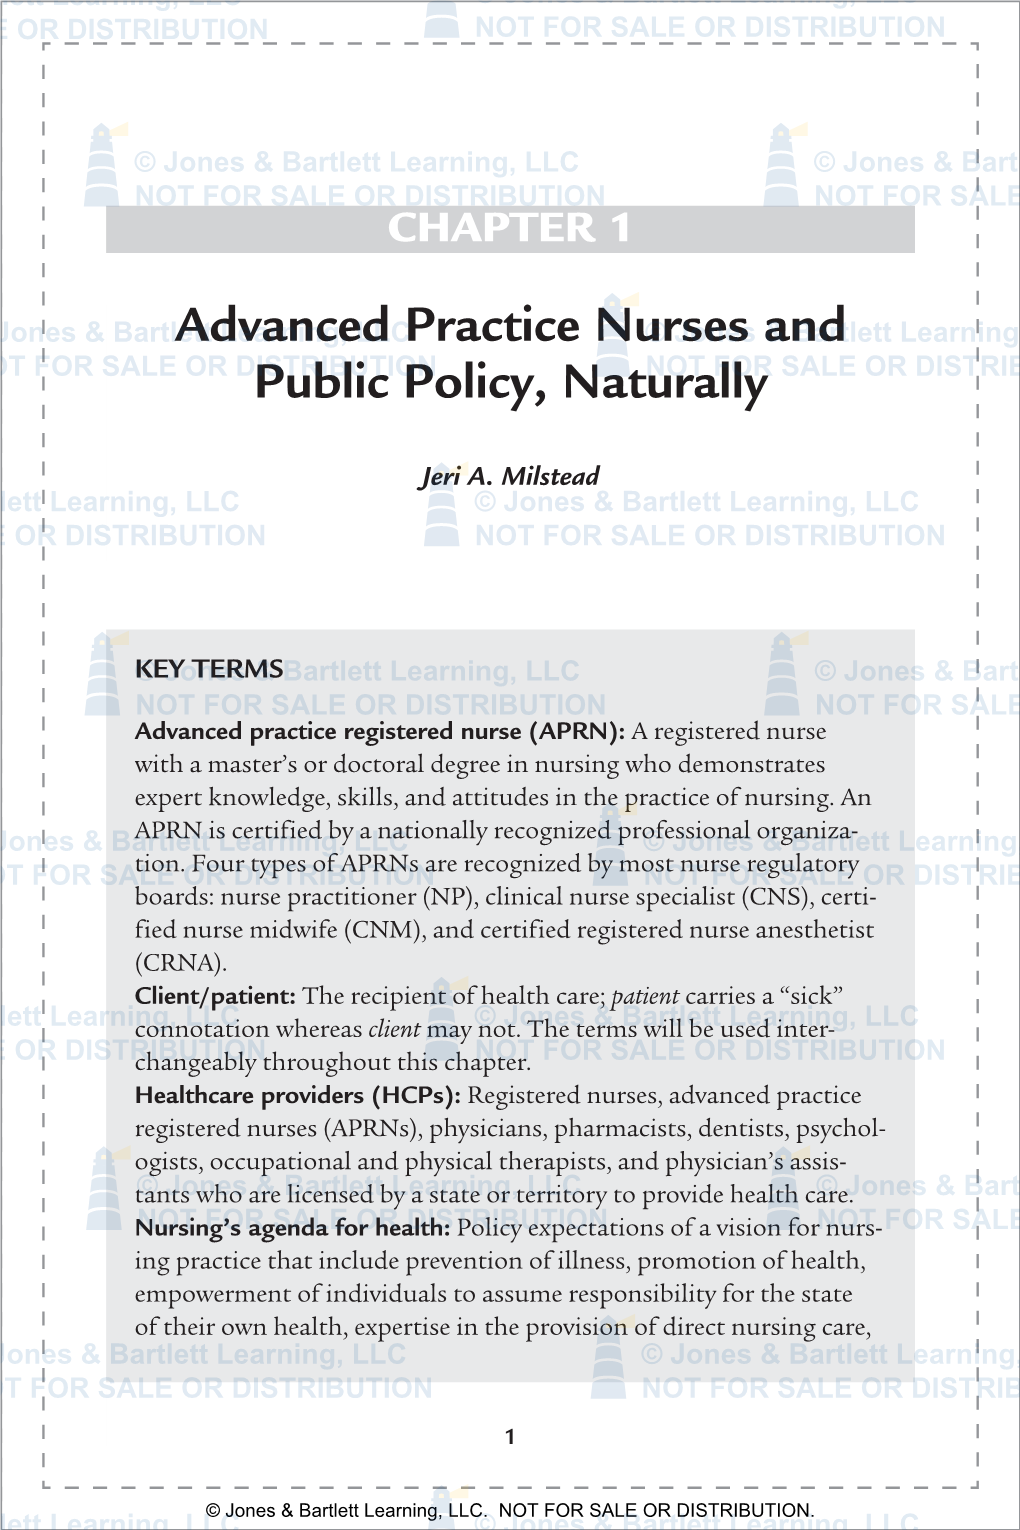 Advanced Practice Nurses and Public Policy, Naturally